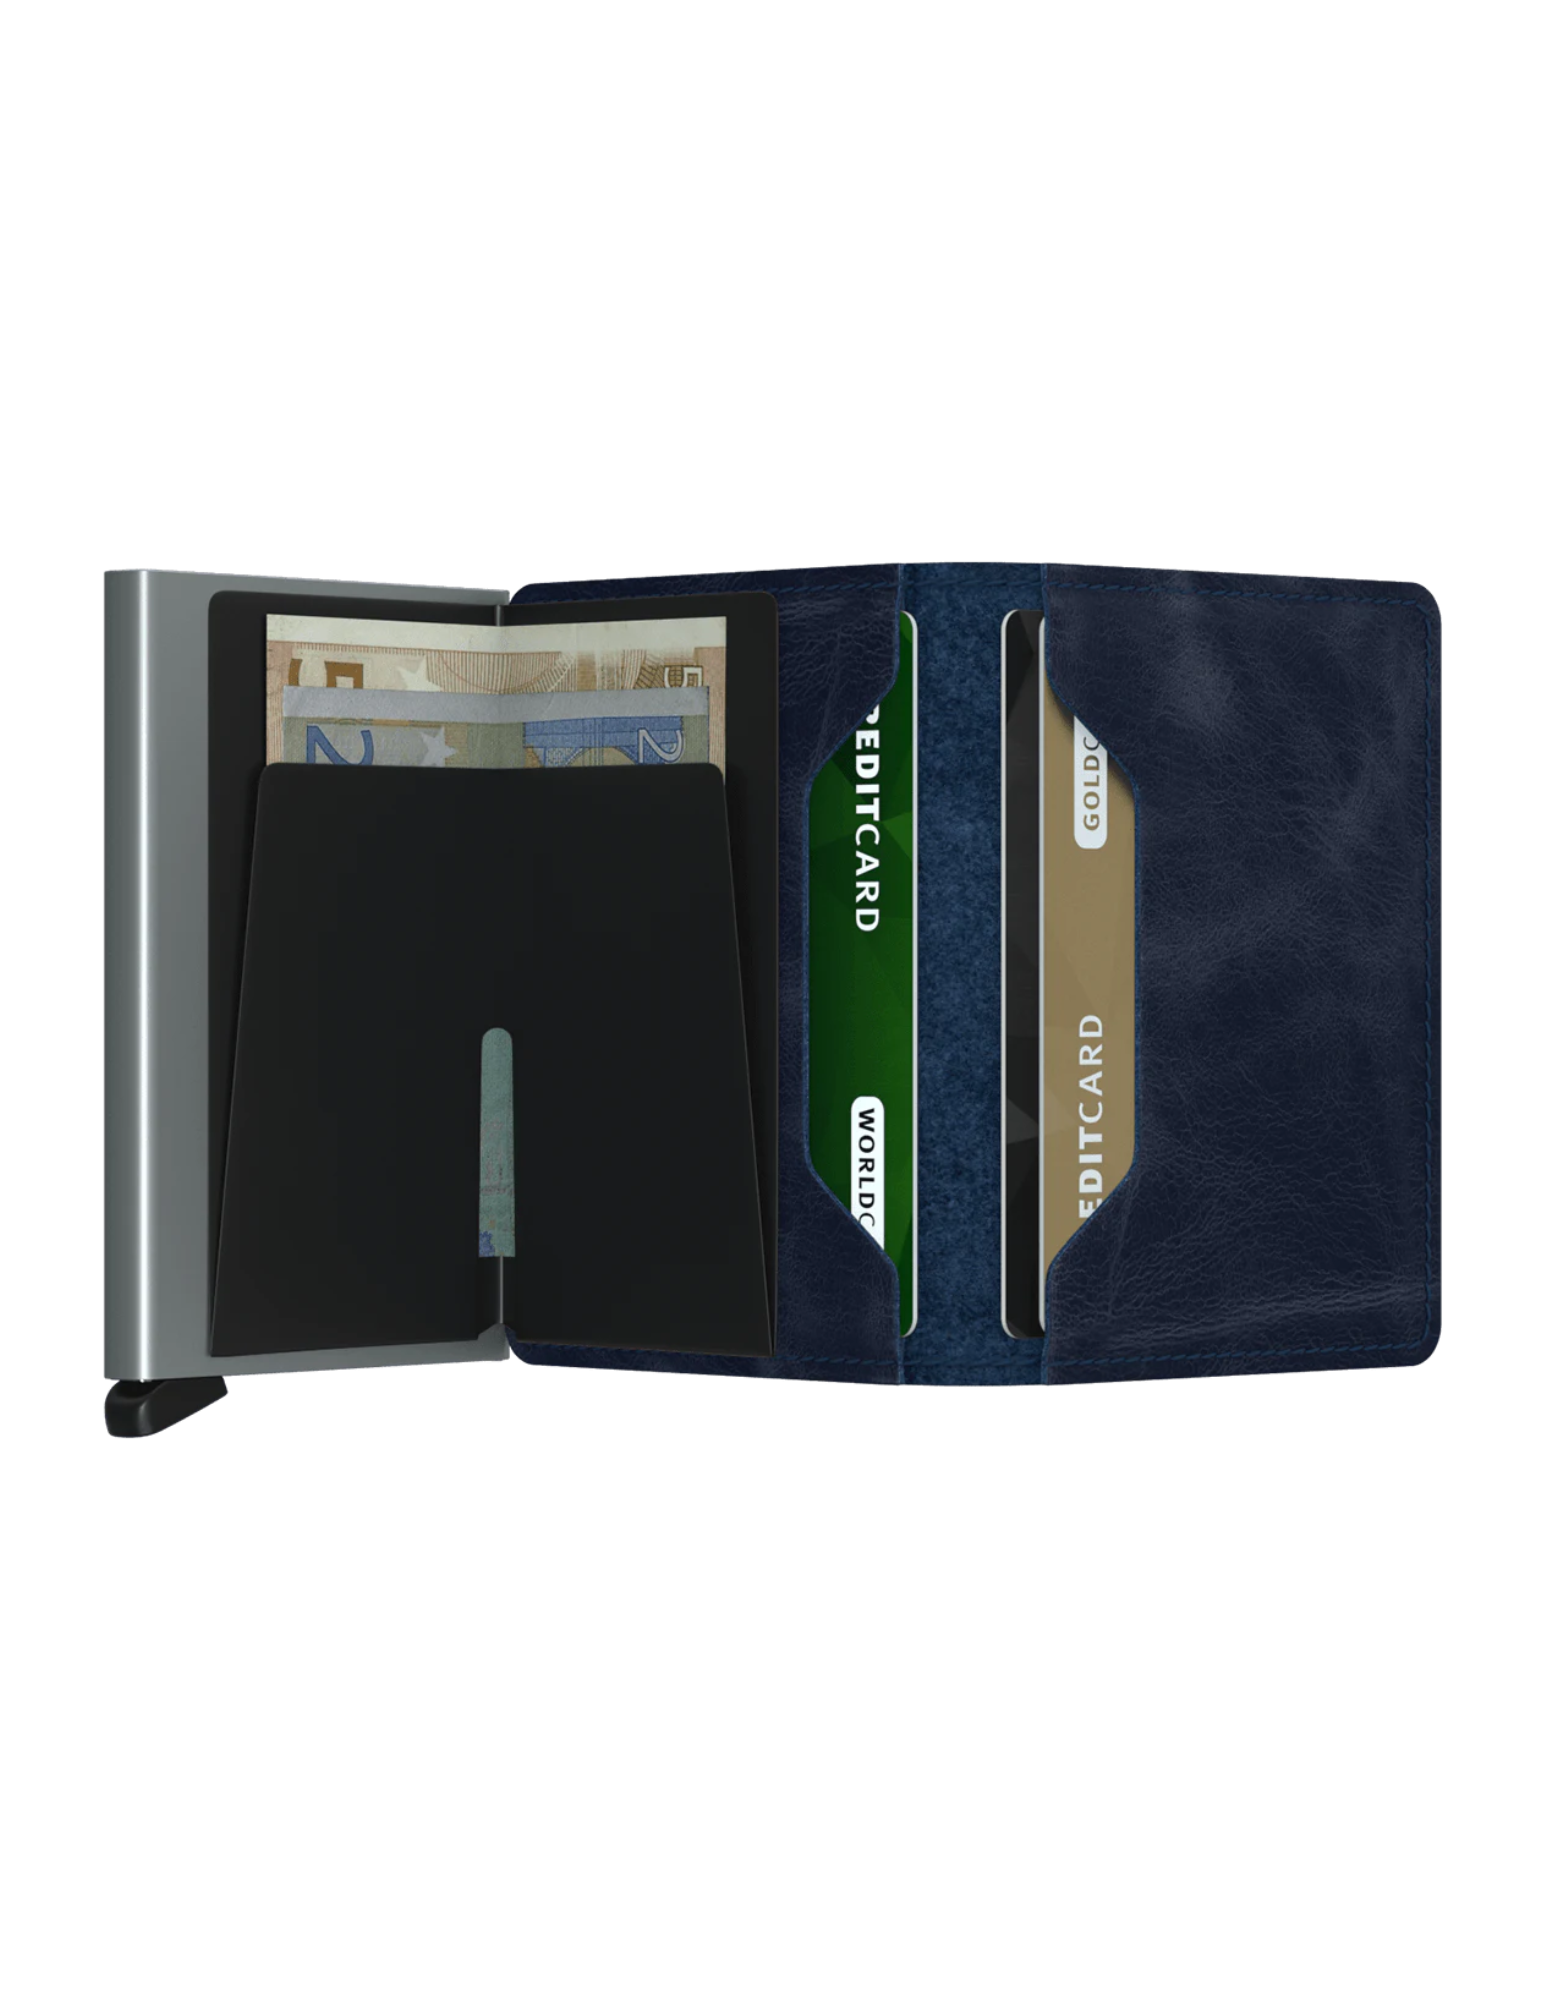 Small in size and surprisingly large in storage capacity, the Miniwallet combines the best of both worlds. The exterior holds banknotes, receipt and cards, while the aluminium Cardprotector allows you to slide out cards with one simple motion and protects them from bending, breaking and unwanted wireless communication.